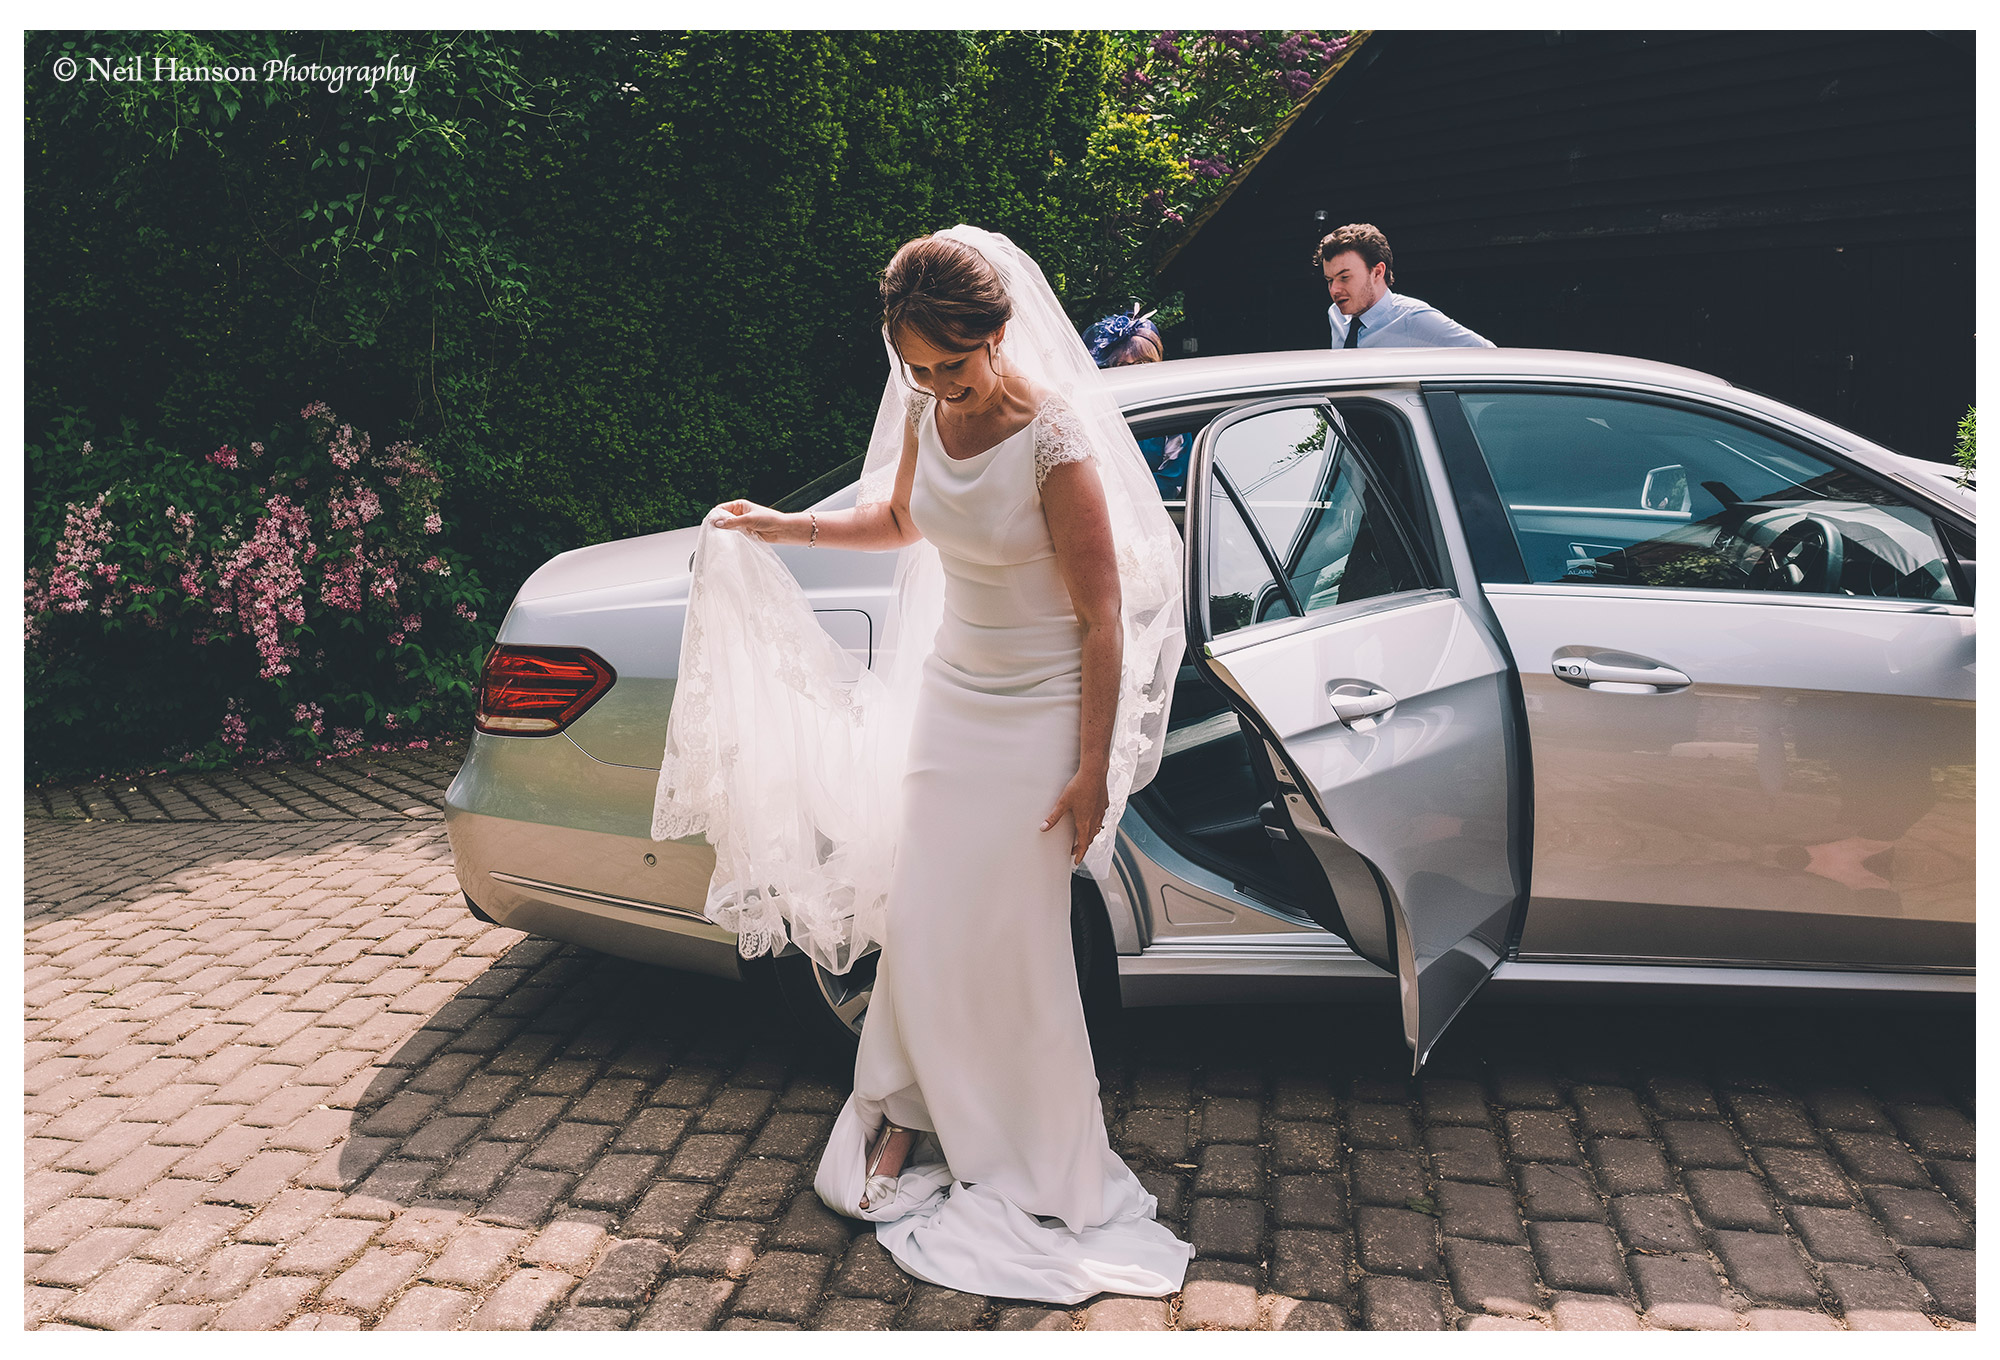 The bride arrives at Old Luxters Barn Wedding